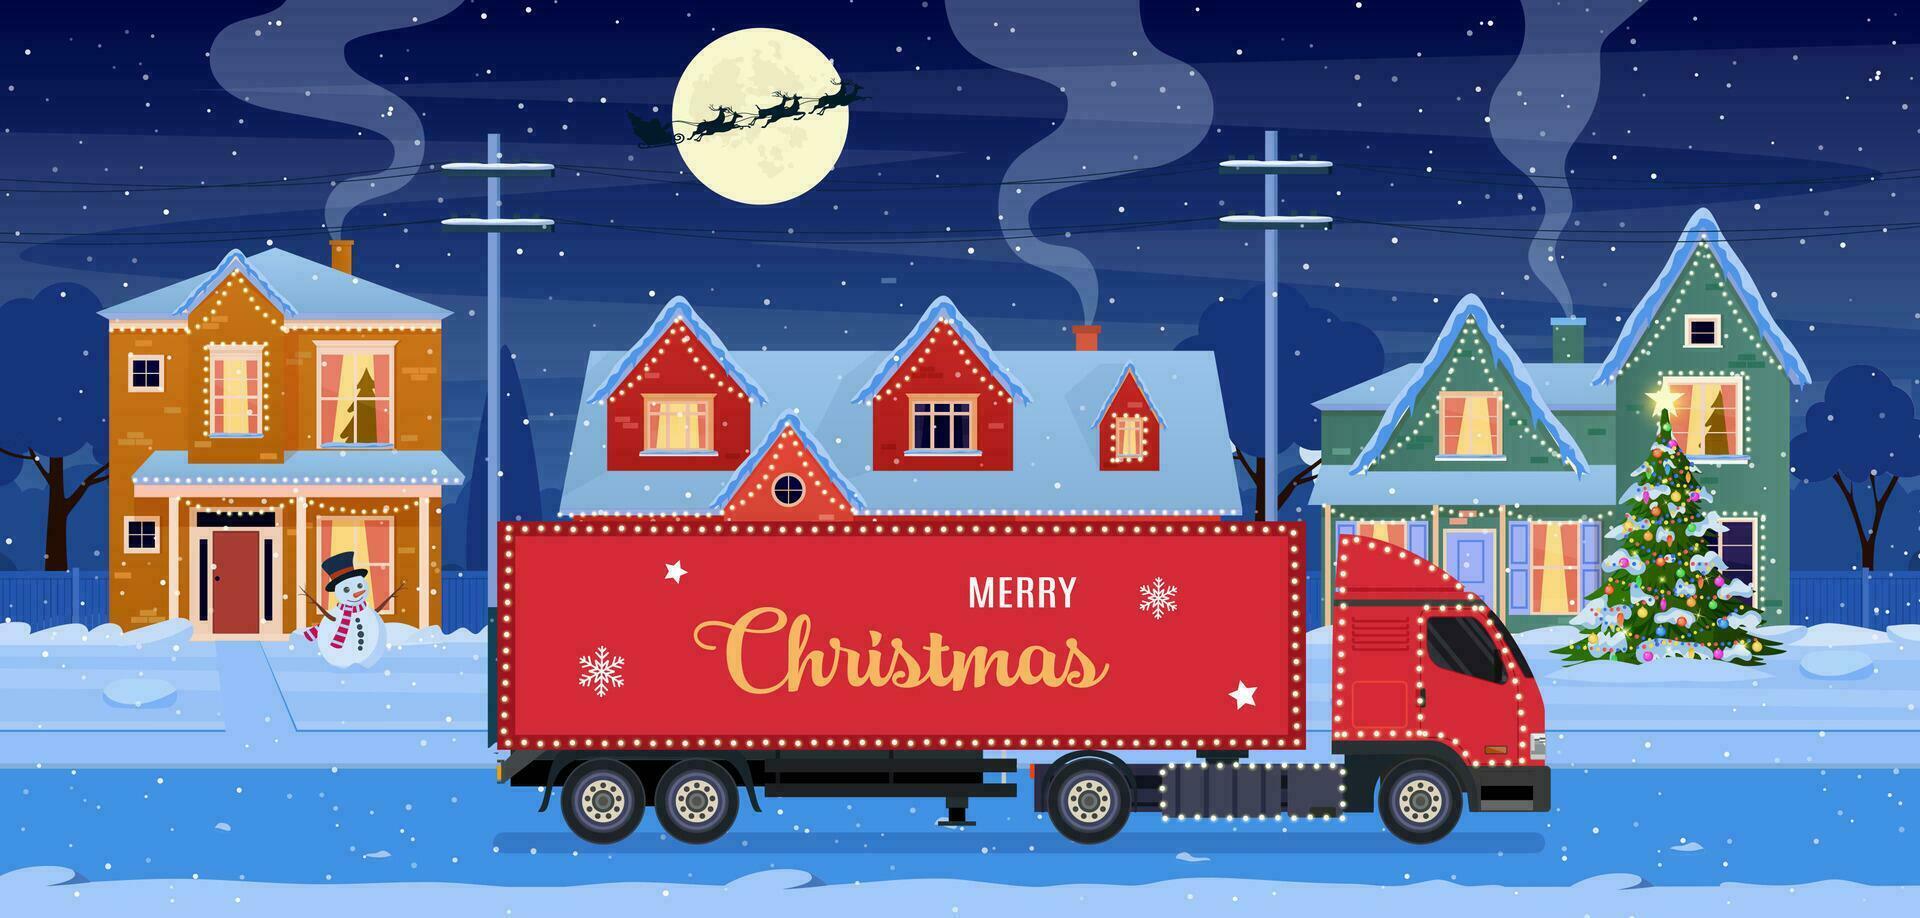 Residential houses with christmas decoration at night. red delivery truck on background with cartoon winter landscape. street and holiday garlands, christmas tree, snowman. Vector illustration